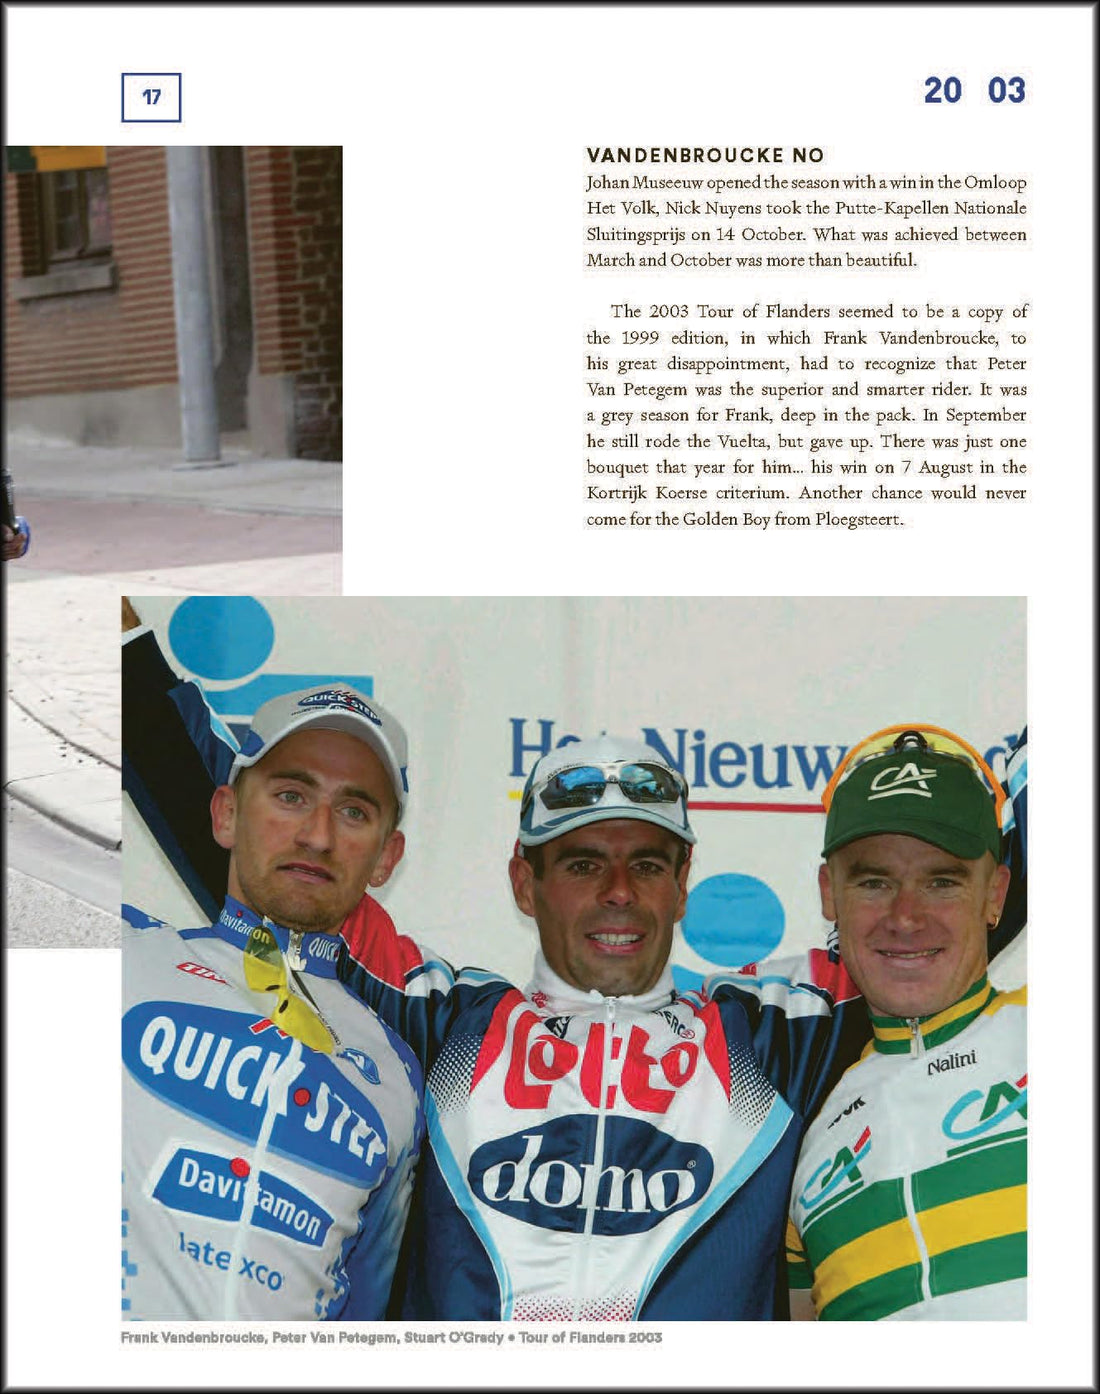 The Wolfpack Years,  20 years of top cycling and winning